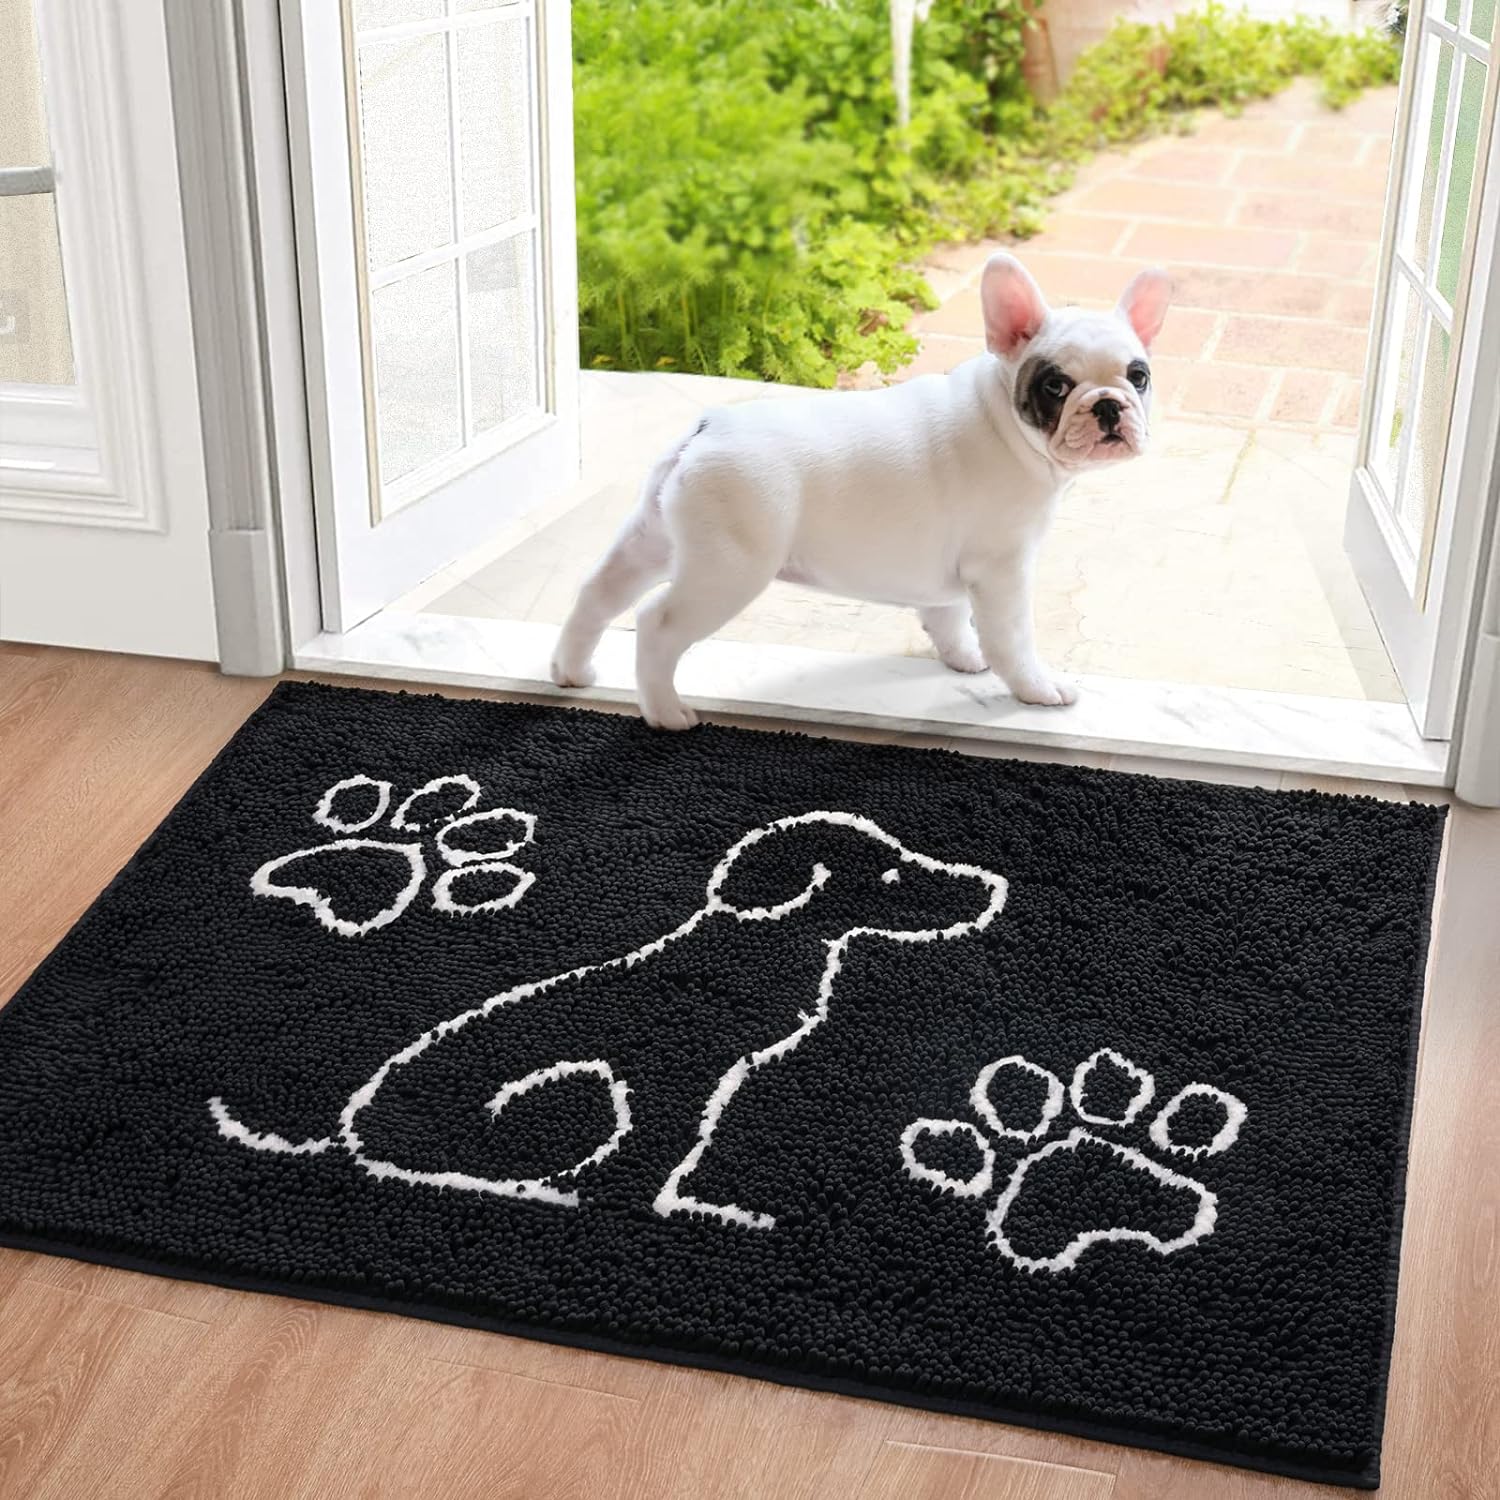 Needed a rug for our back door where dogs come in. Lots of rain last week and the rug kept the floor dry and non muddy. Stays put well and absorbs well. It is thick so not all doors will open over it.